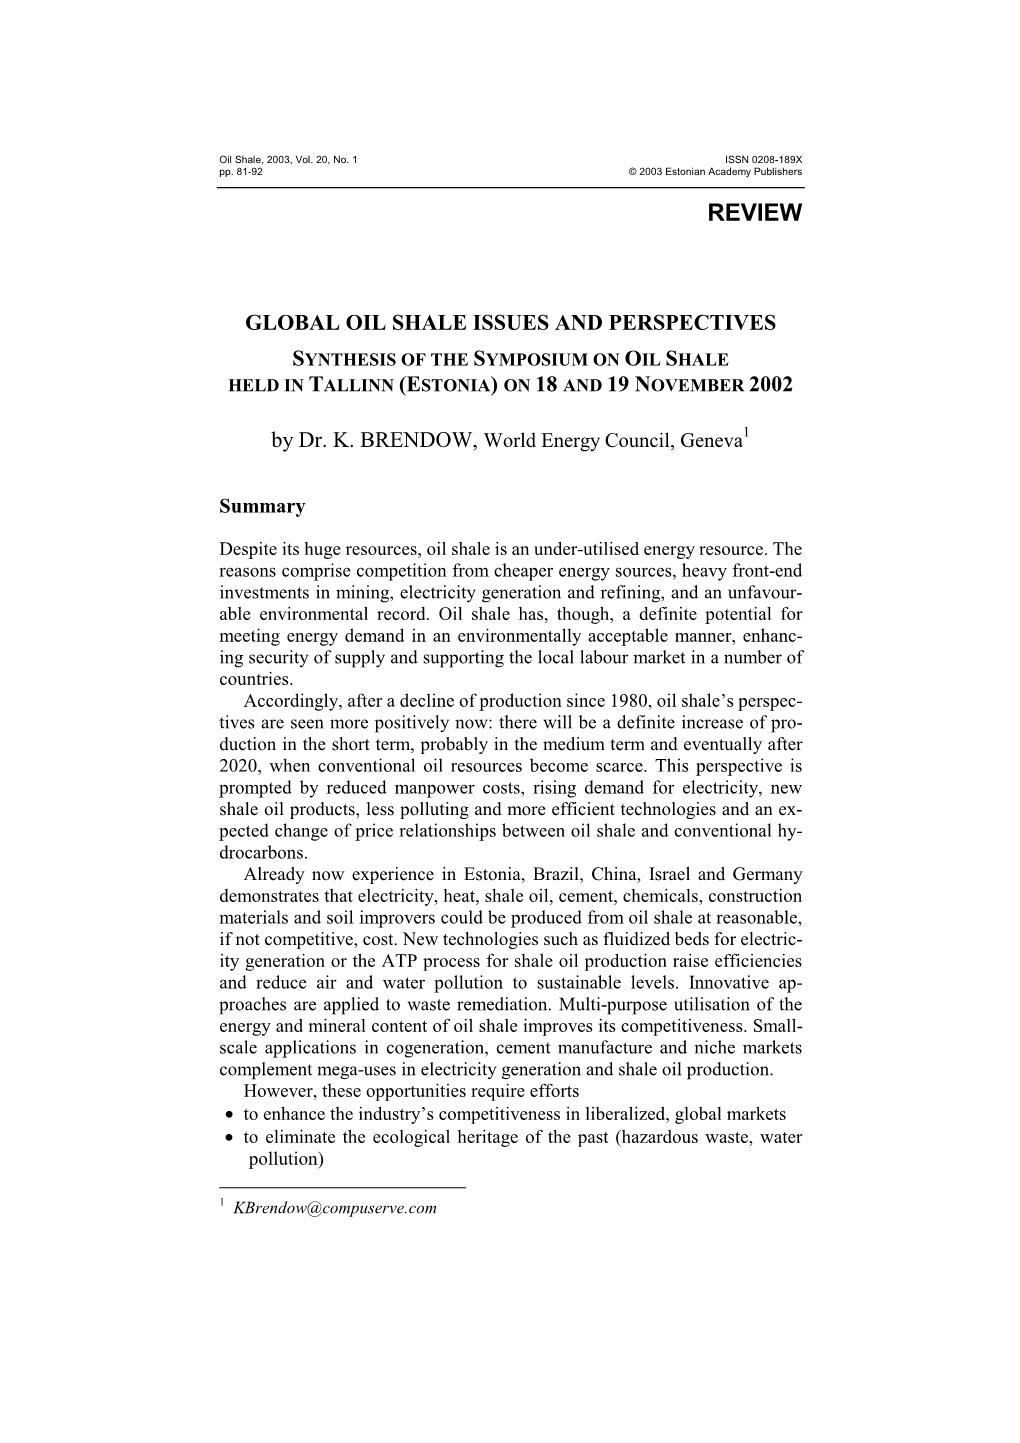 Global Oil Shale Issues and Perspectives Synthesis of the Symposium on Oil Shale Held in Tallinn (Estonia) on 18 and 19 November 2002